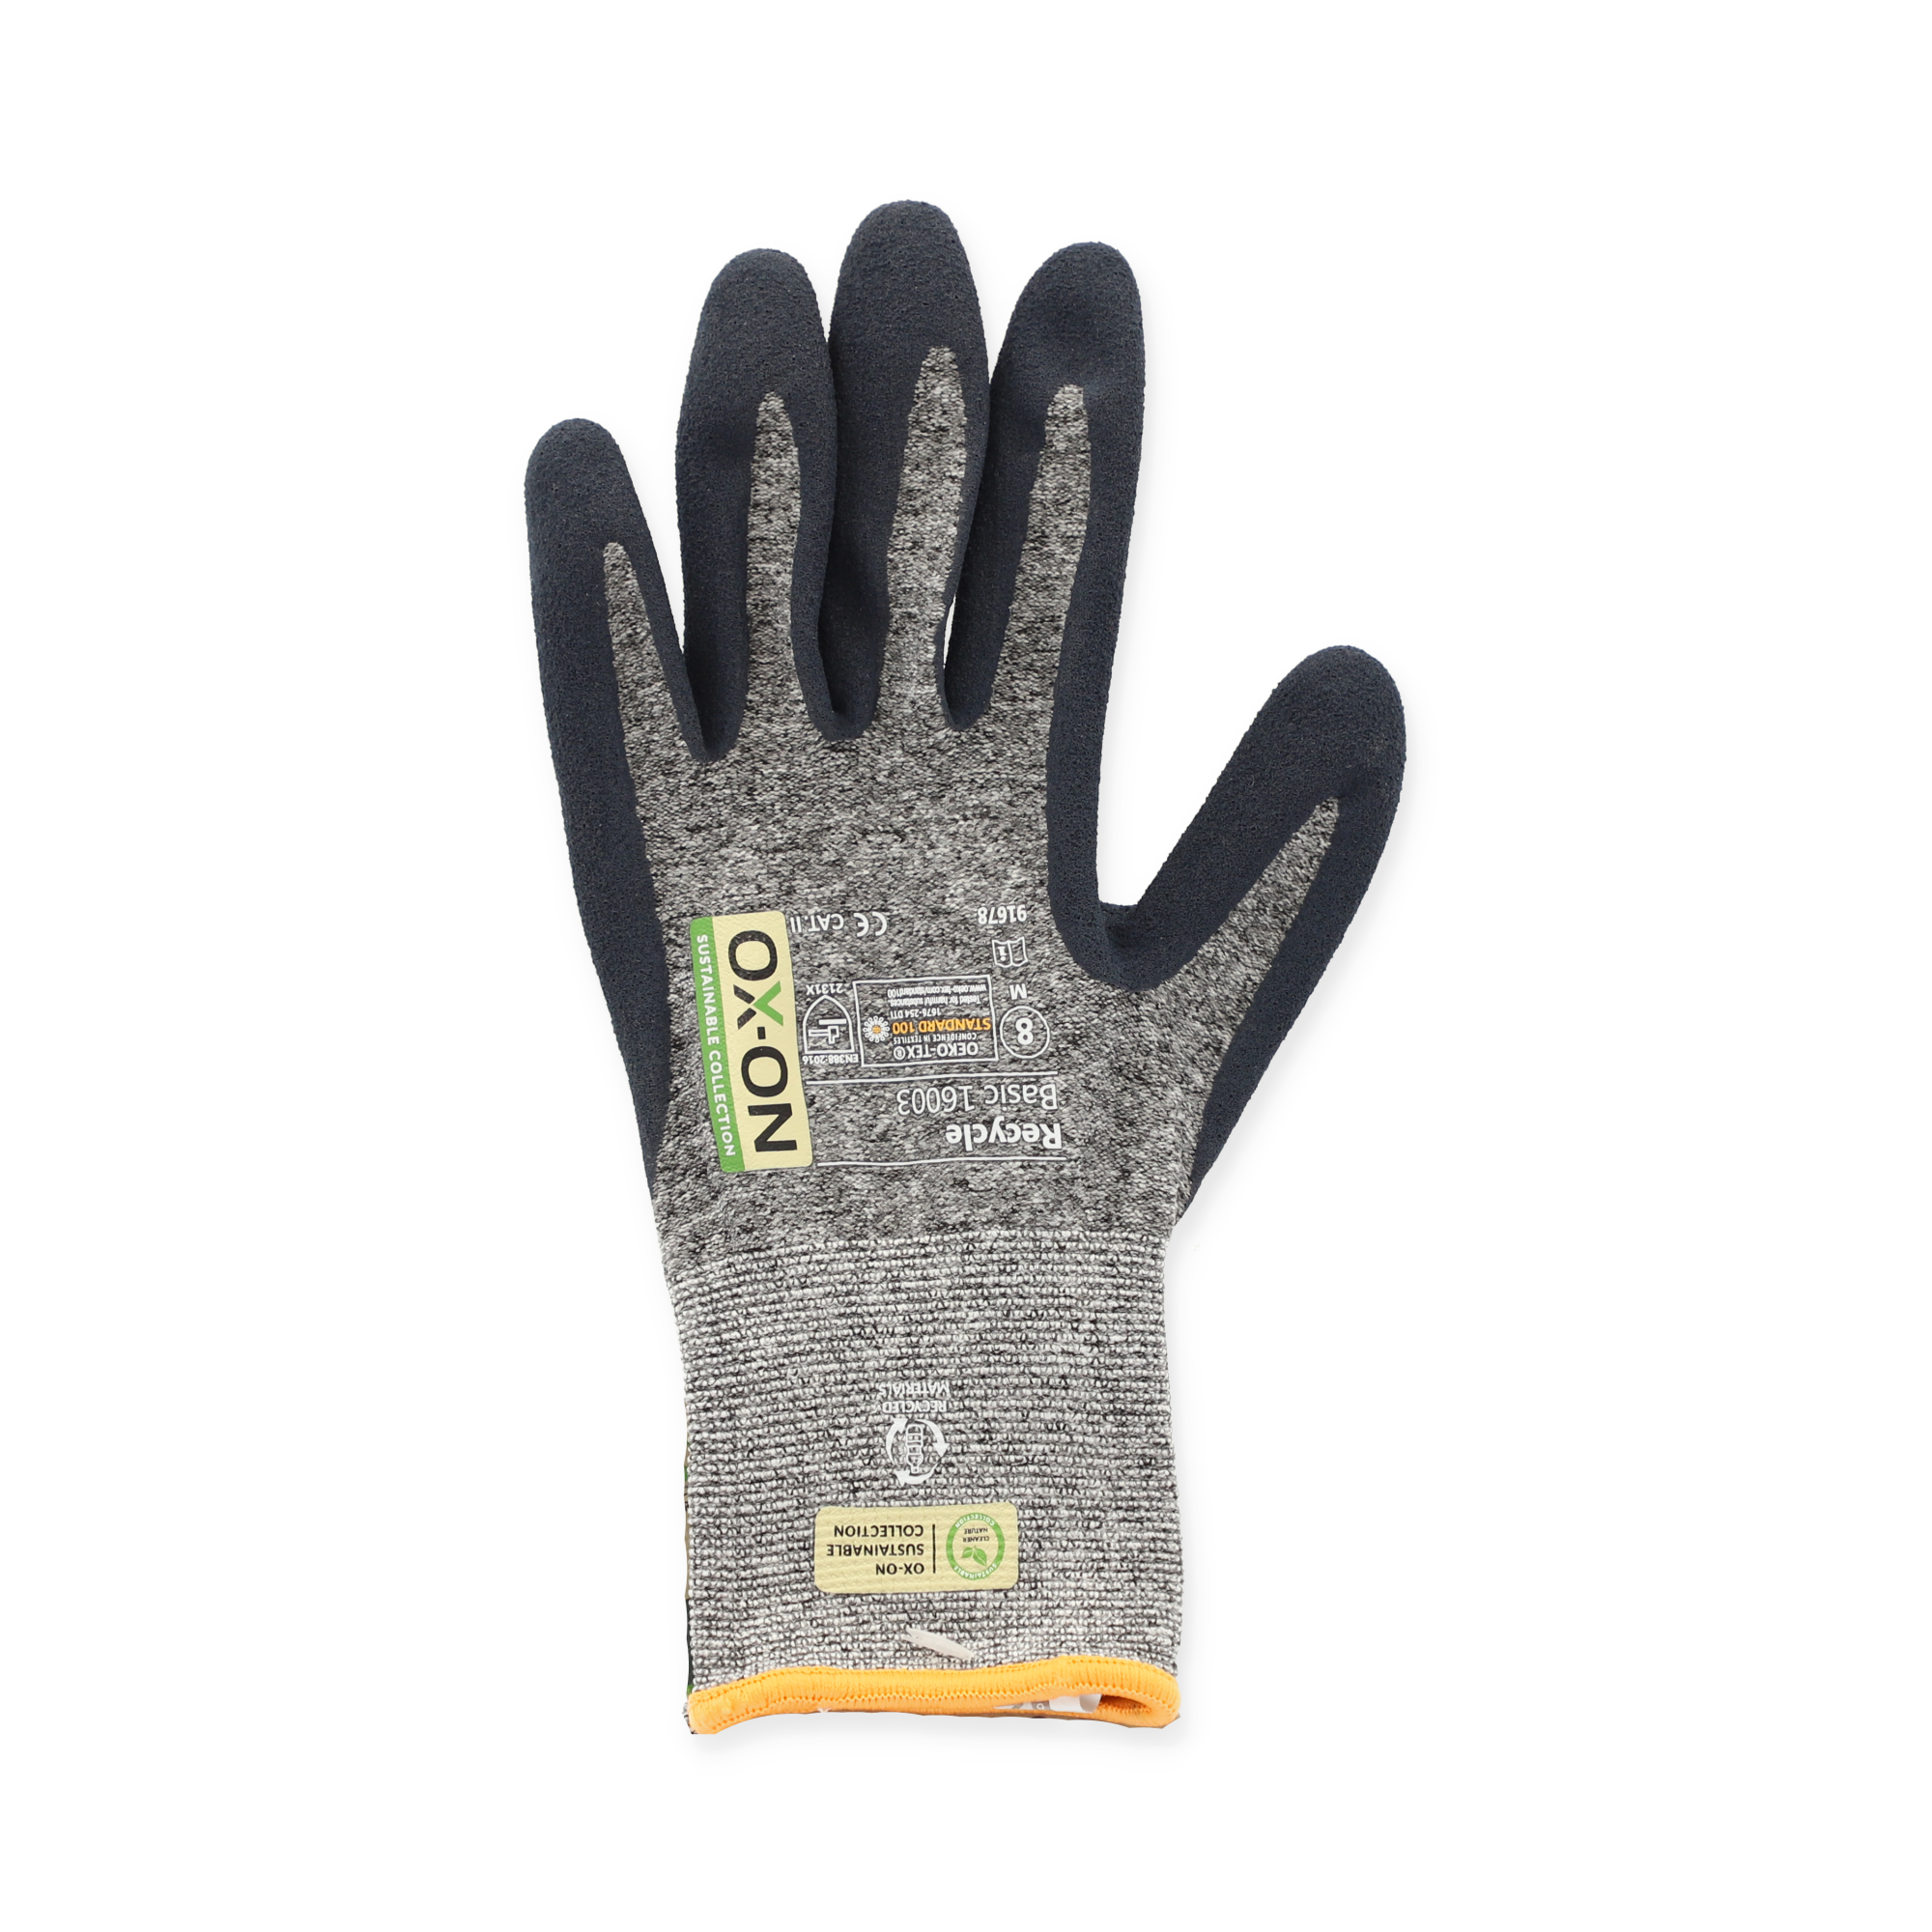 Handschuhe 'Recycle Basic 16003' grau Gr. 10 + product picture